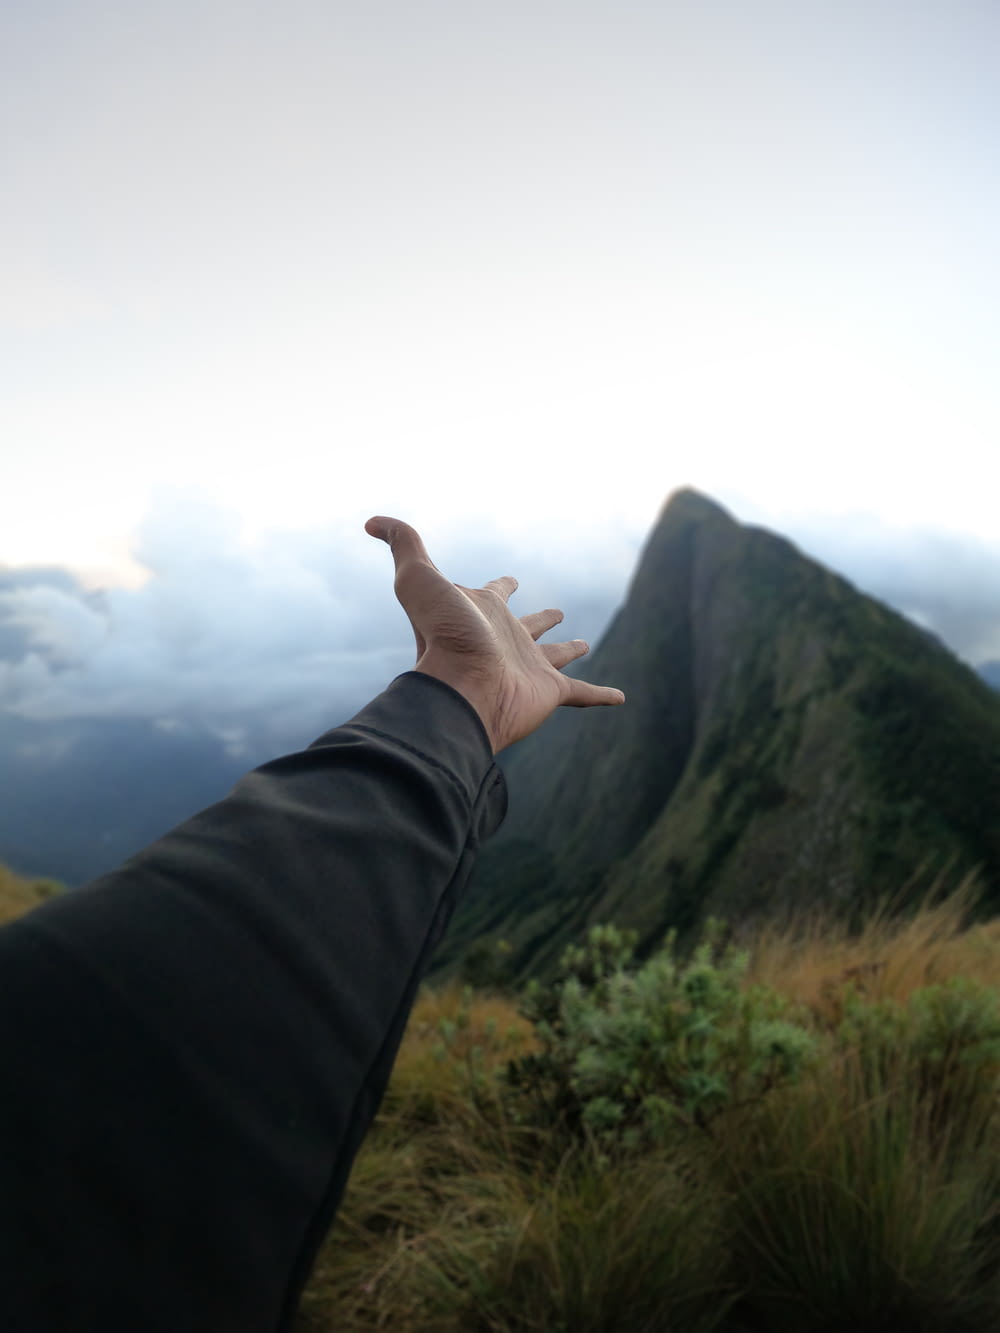 a hand reaching out towards a mountain range